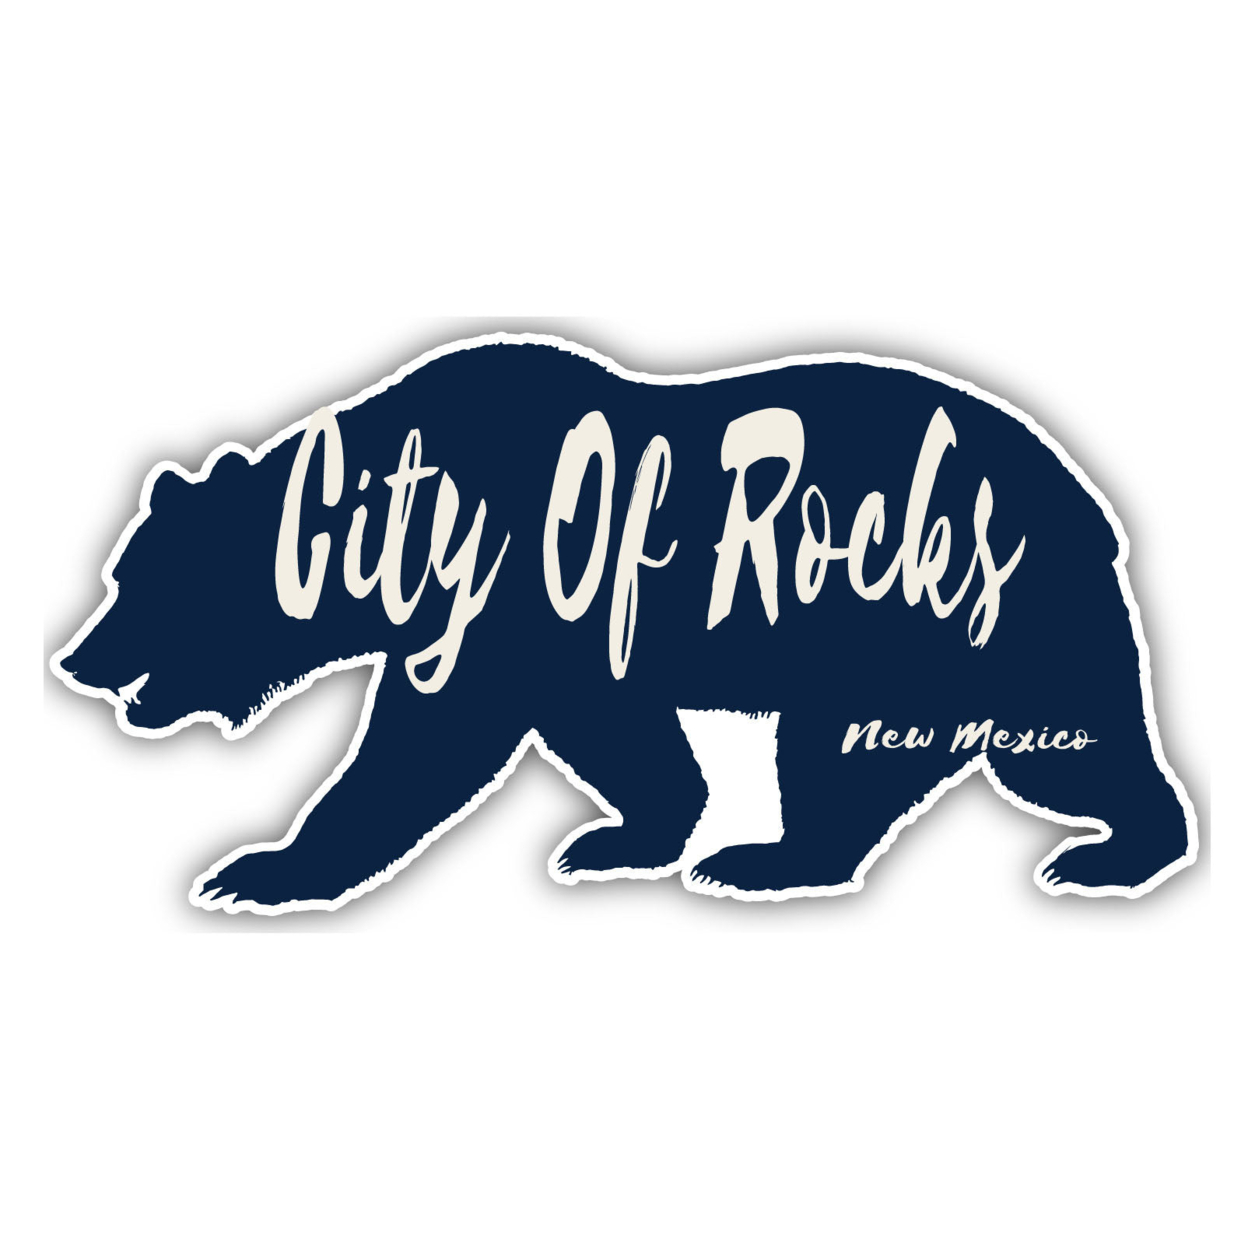 City Of Rocks New Mexico Souvenir Decorative Stickers (Choose Theme And Size) - 4-Pack, 12-Inch, Bear